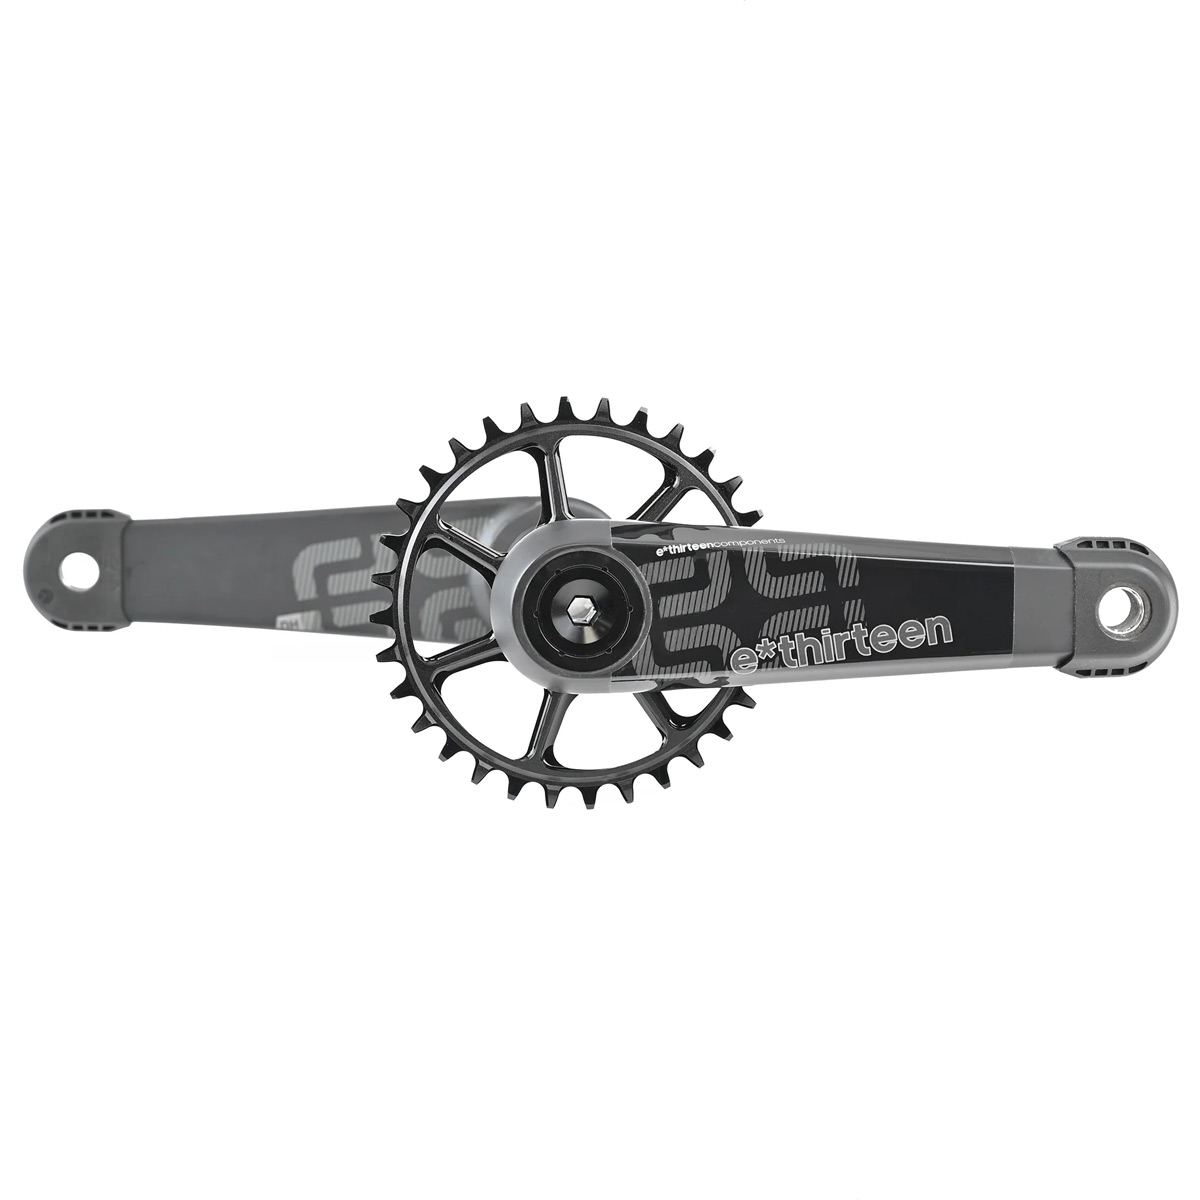 Picture of e*thirteen LG1 DH Race Carbon Cranks - Special Offer - 83mm - 34T - 165mm - black